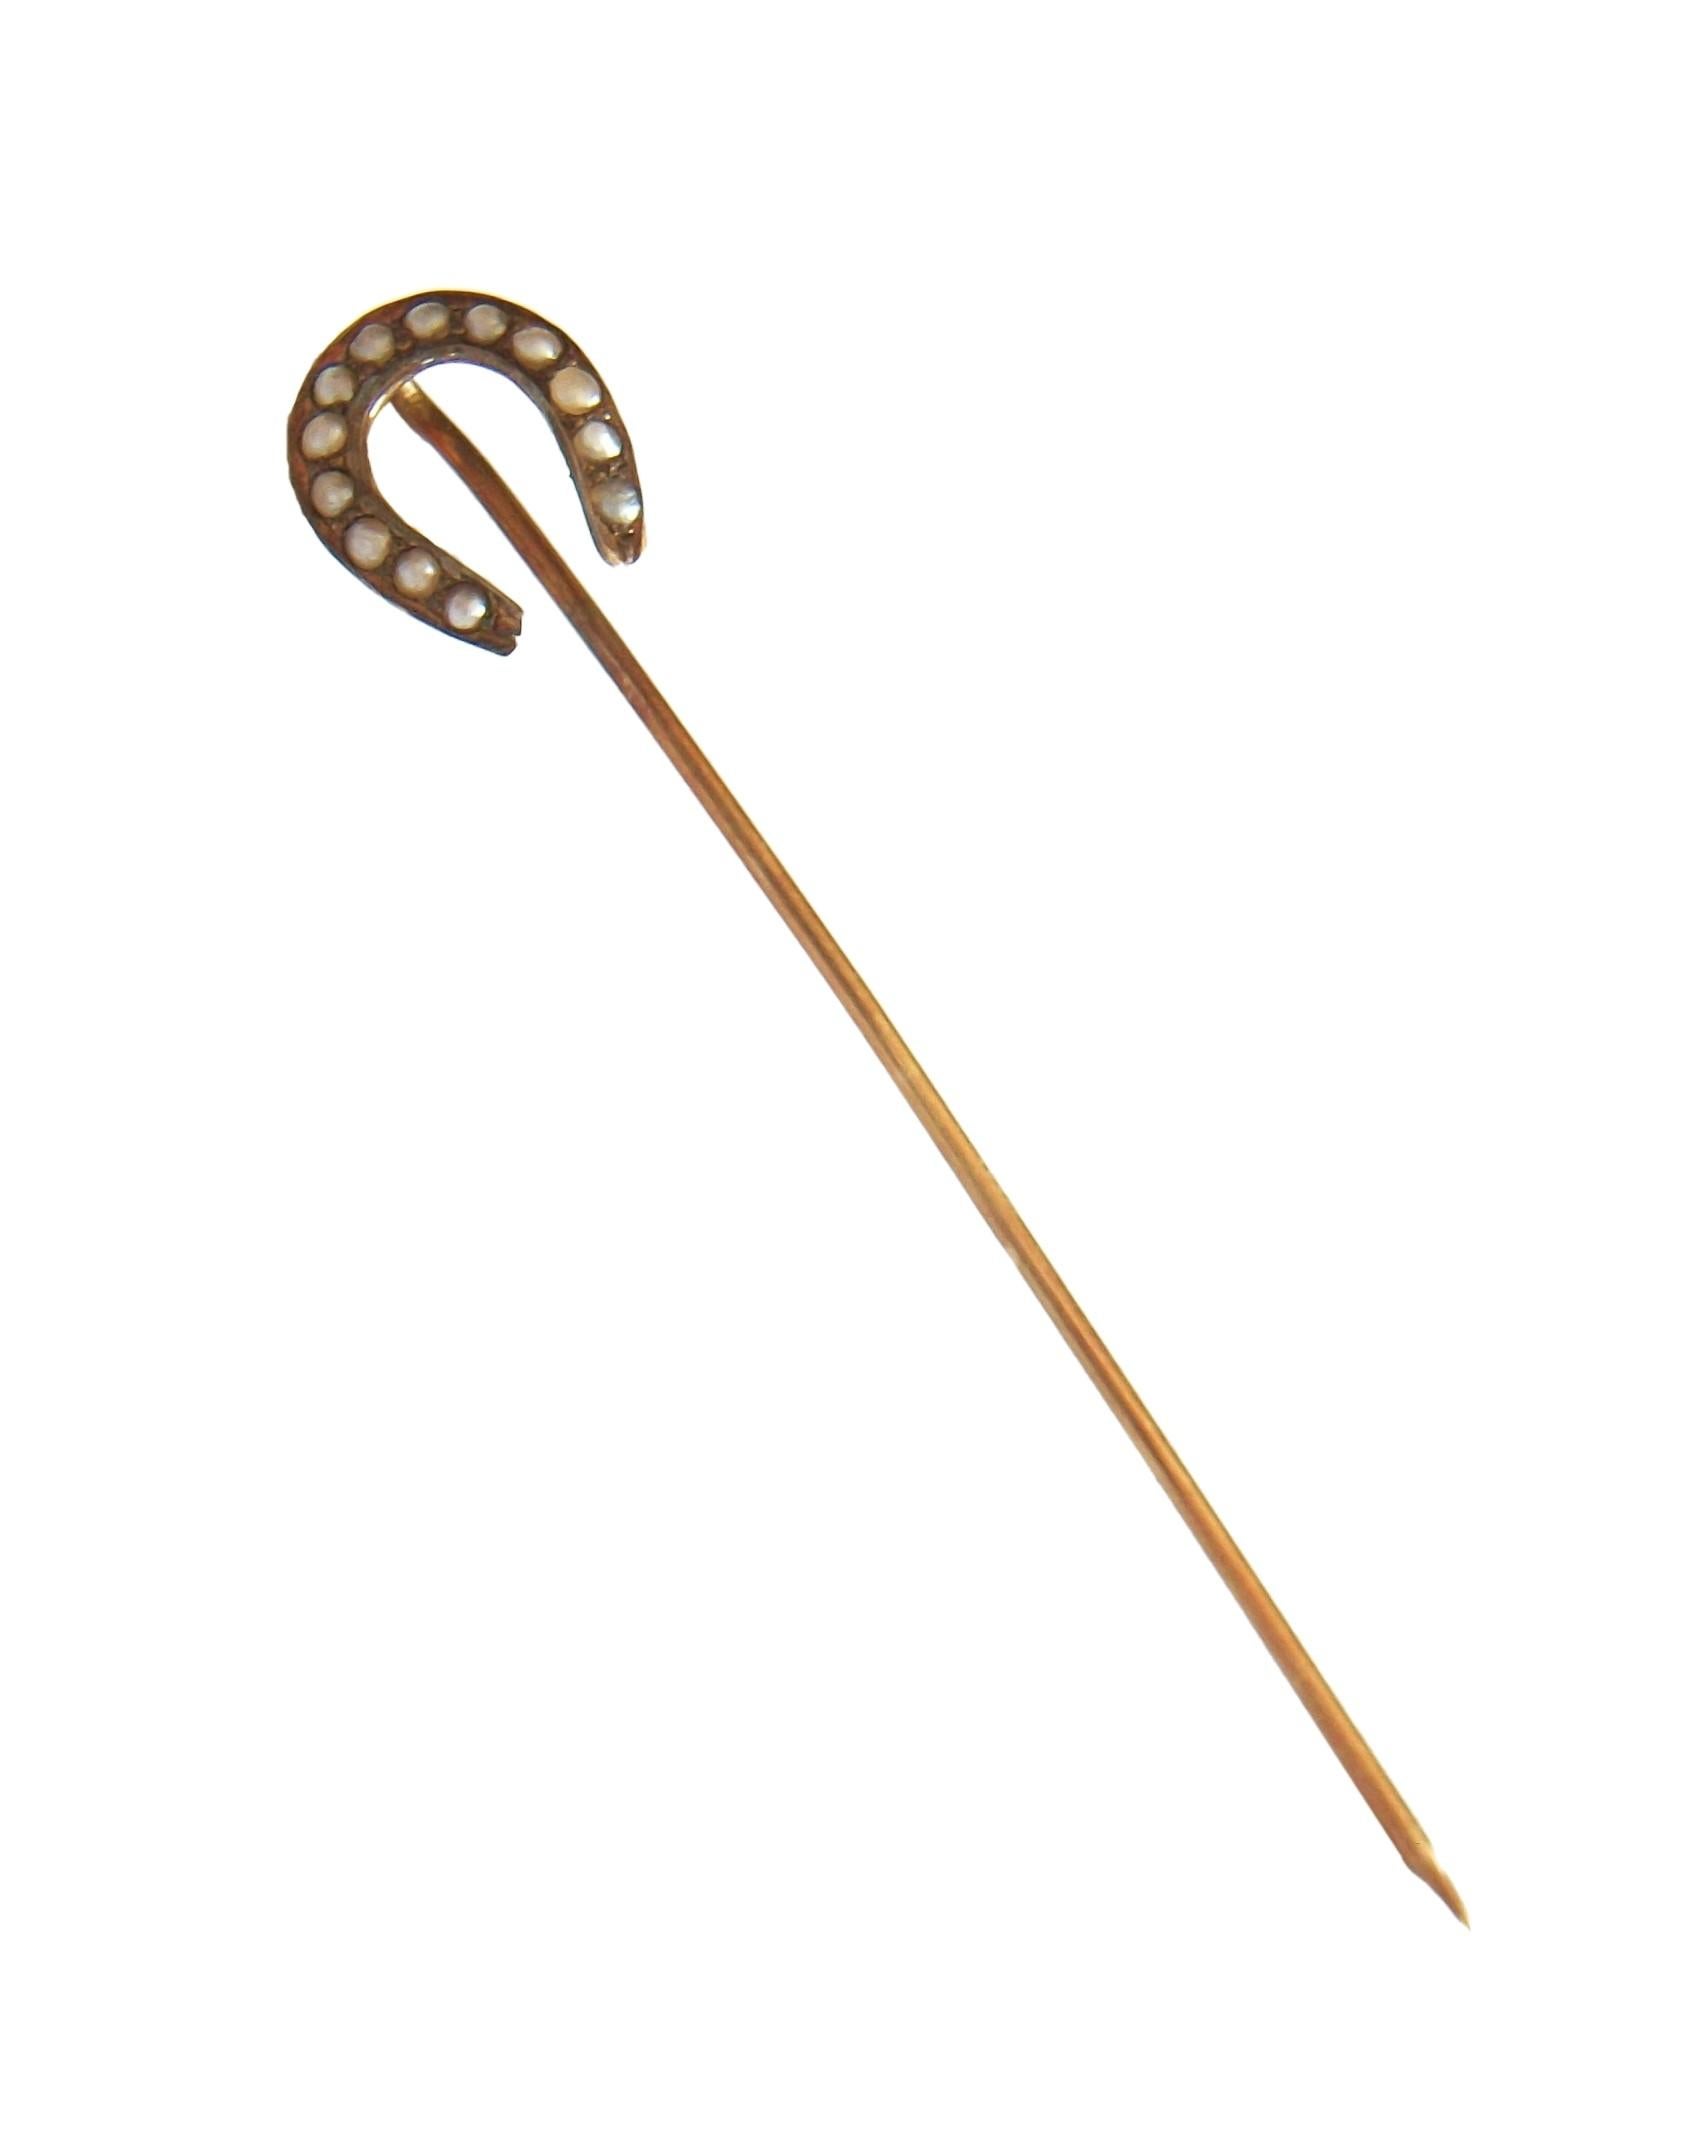 Round Cut Ehlers & Co., 14k Gold Horseshoe Stick Pin with Seed Pearls, U.S., circa 1900 For Sale